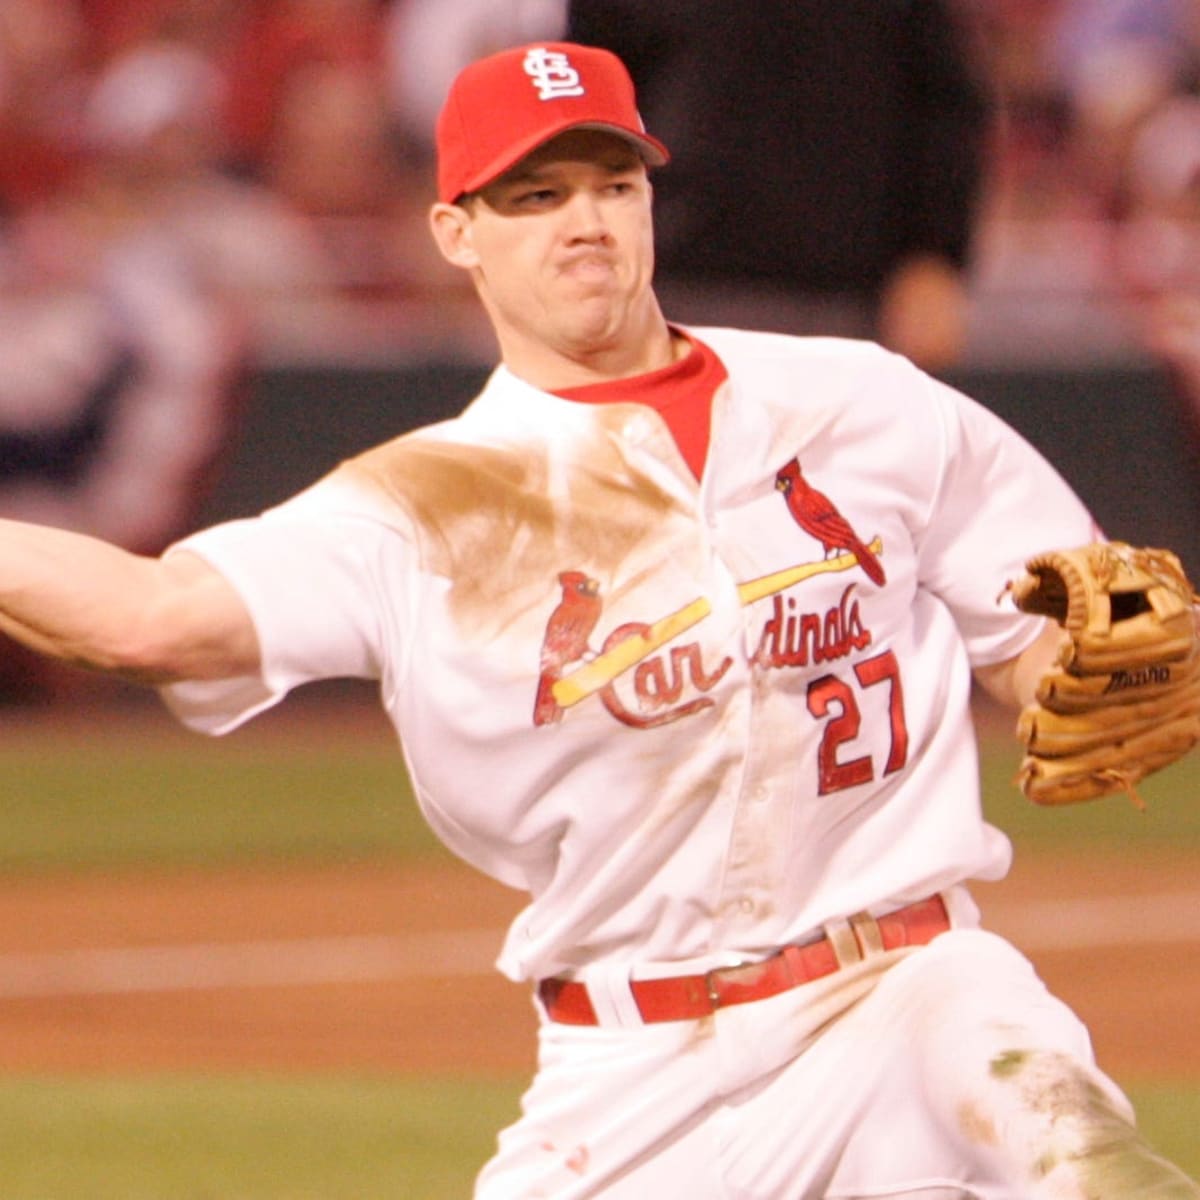 Scott Rolen is Remembered for his Tenacity